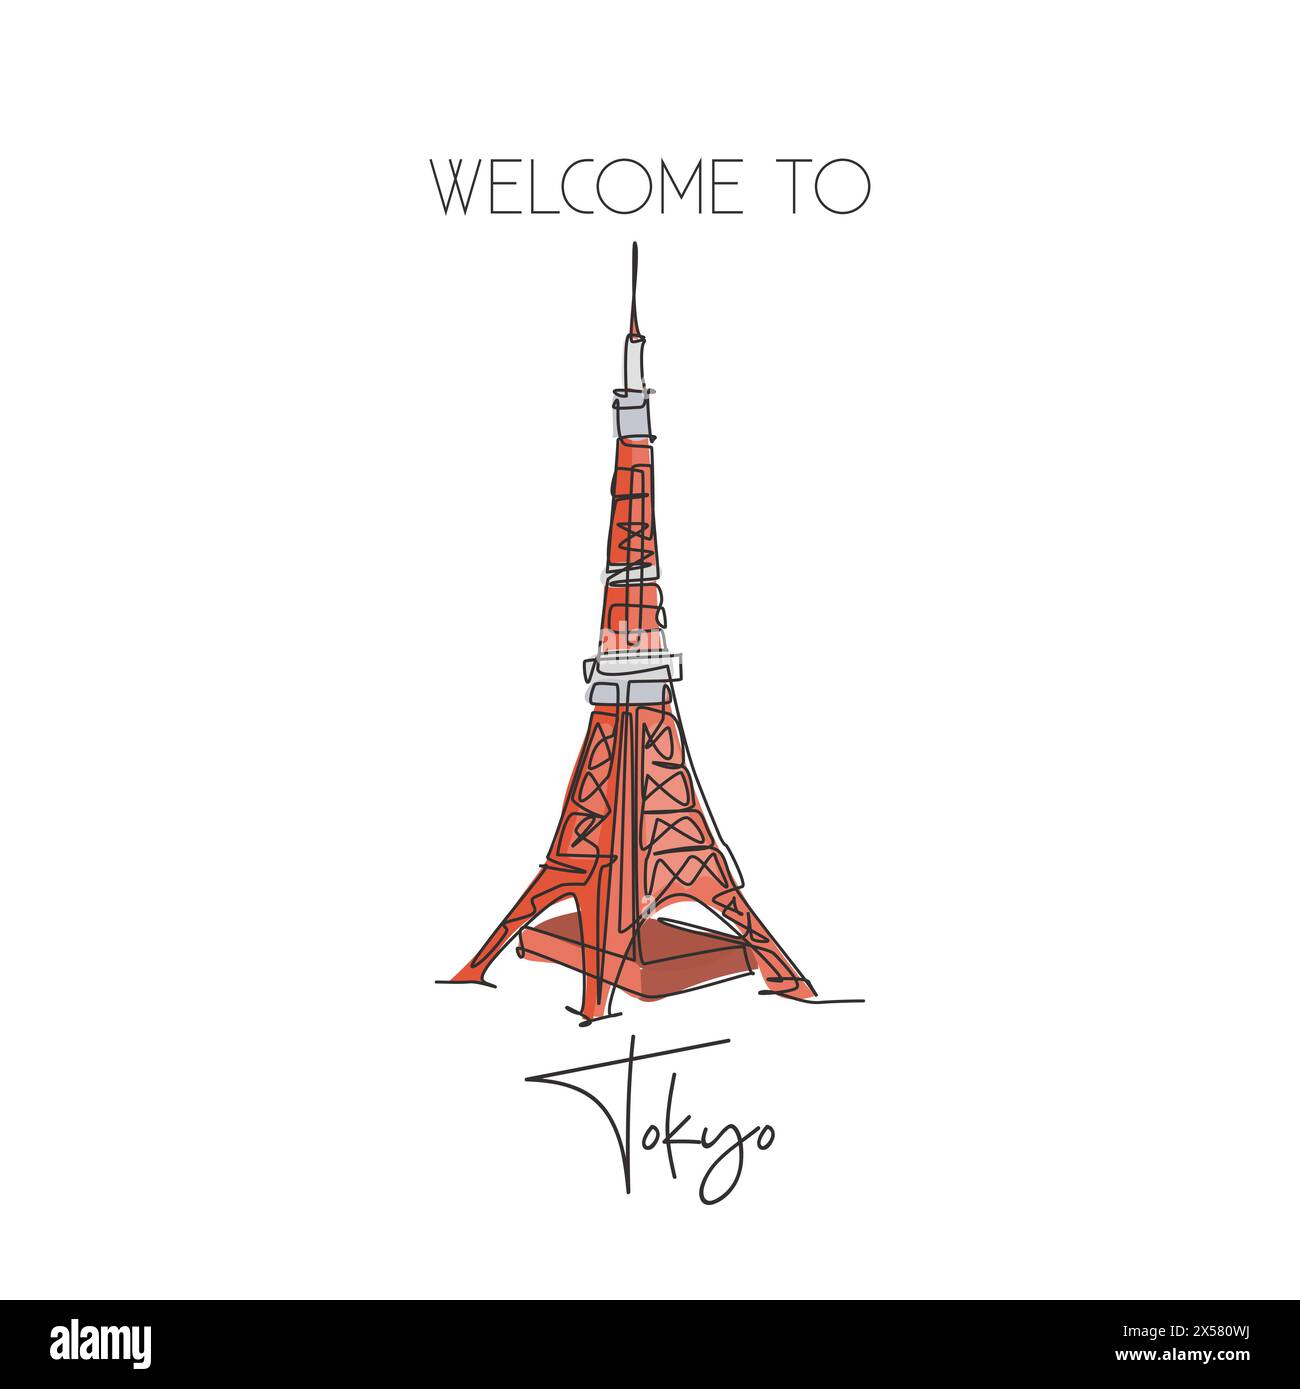 Depok, Indonesia - August 1, 2019: Single continuous line drawing Tokyo Tower landmark. Beauty iconic place in Tokyo, Japan. World travel home wall de Stock Vector